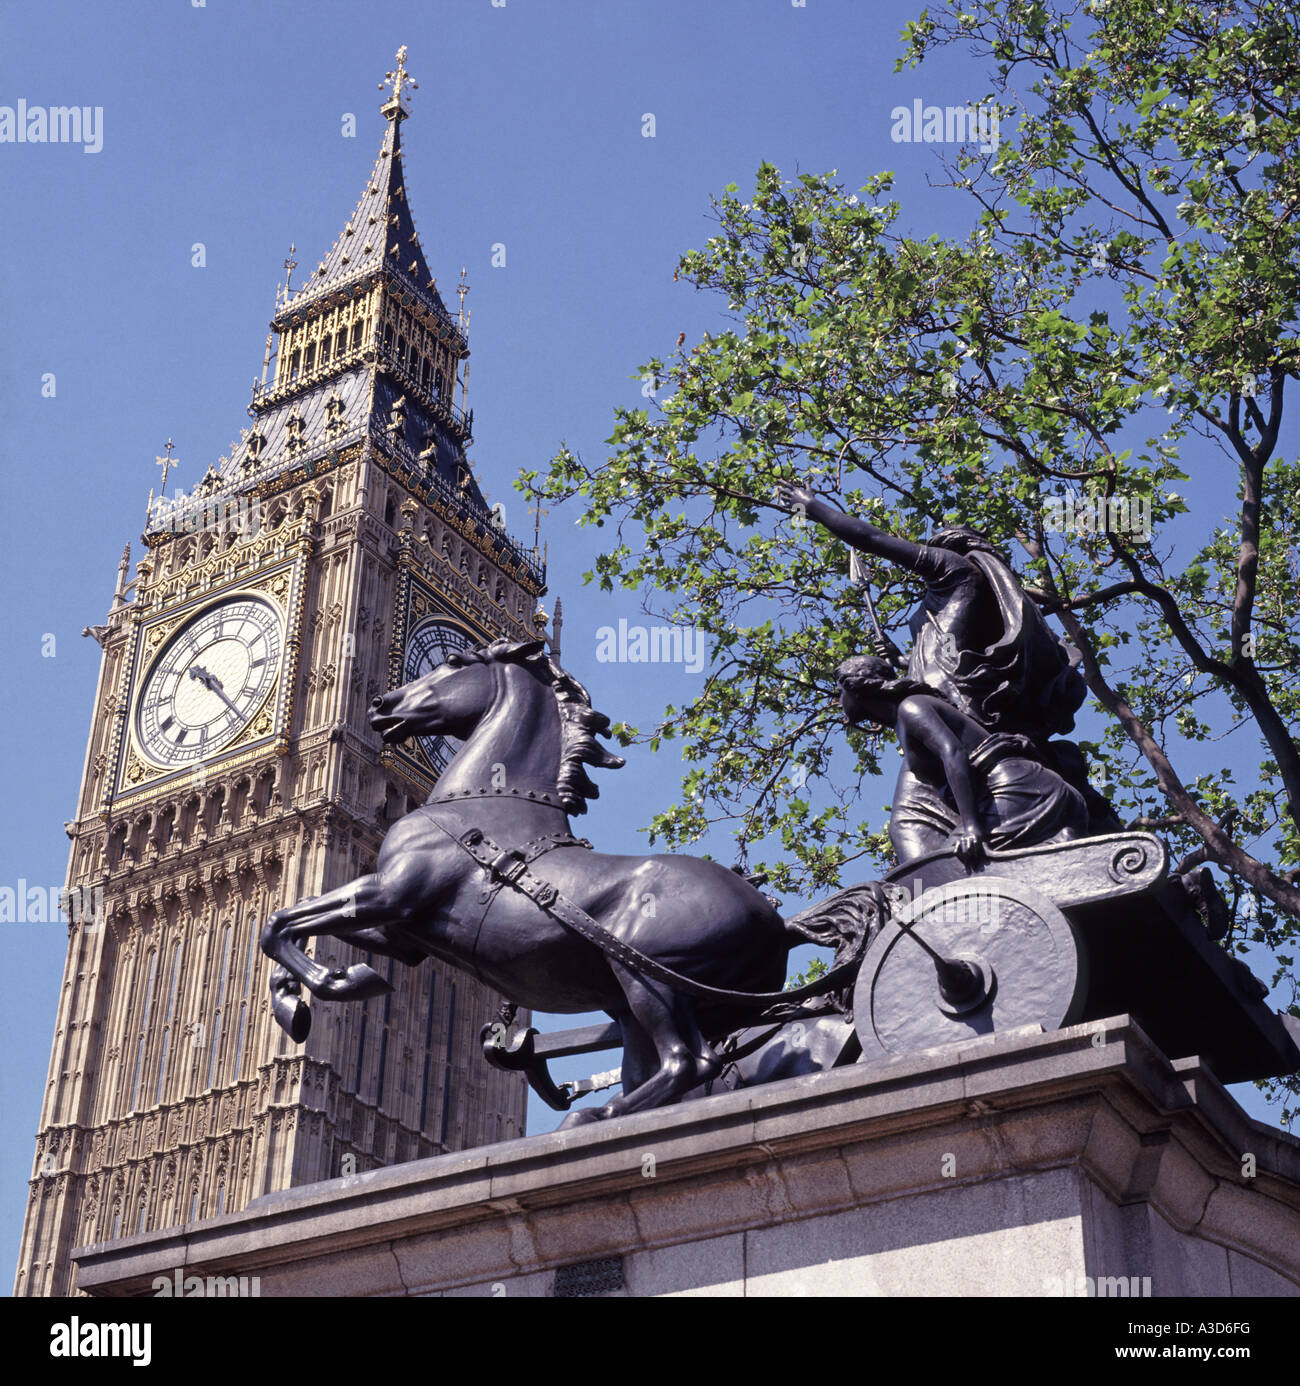 London Westminster Big Ben clock tower and the Statue of Queen Boudica with chariot Stock Photo